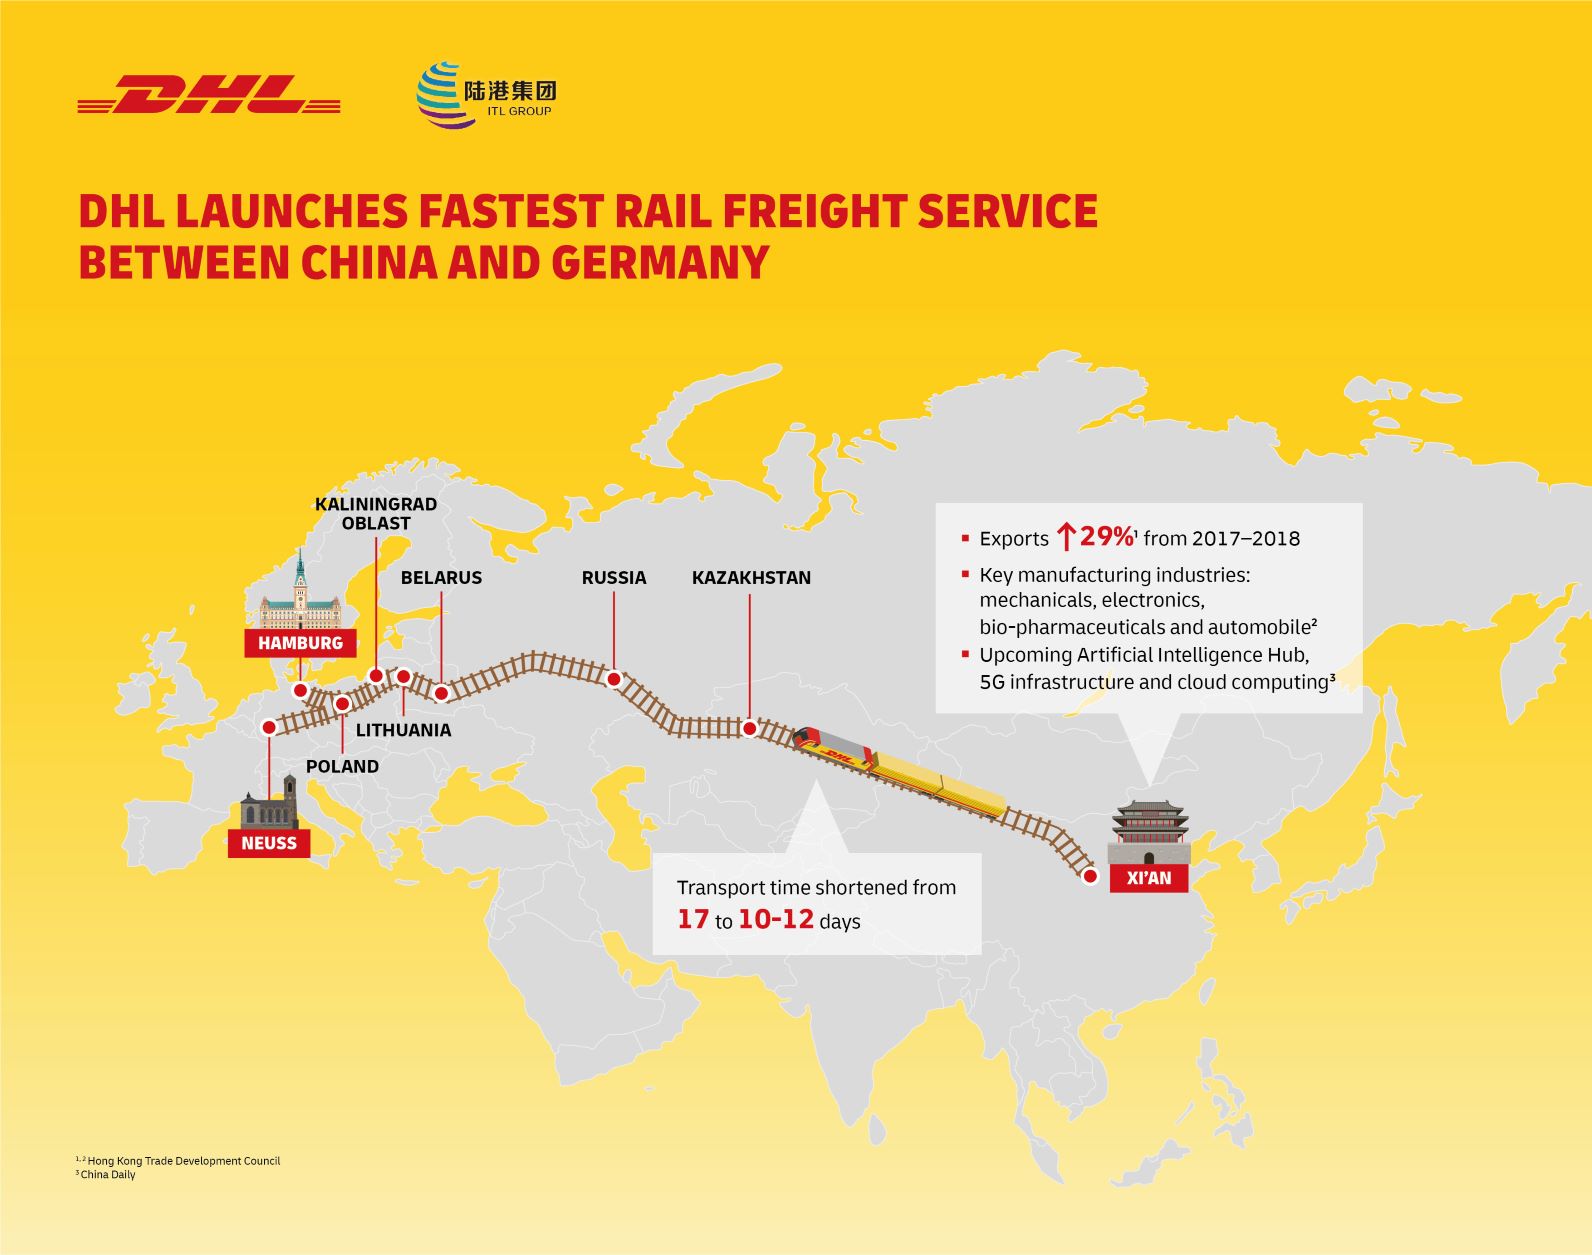 DHL launched fastest rail freight service between China and Germany